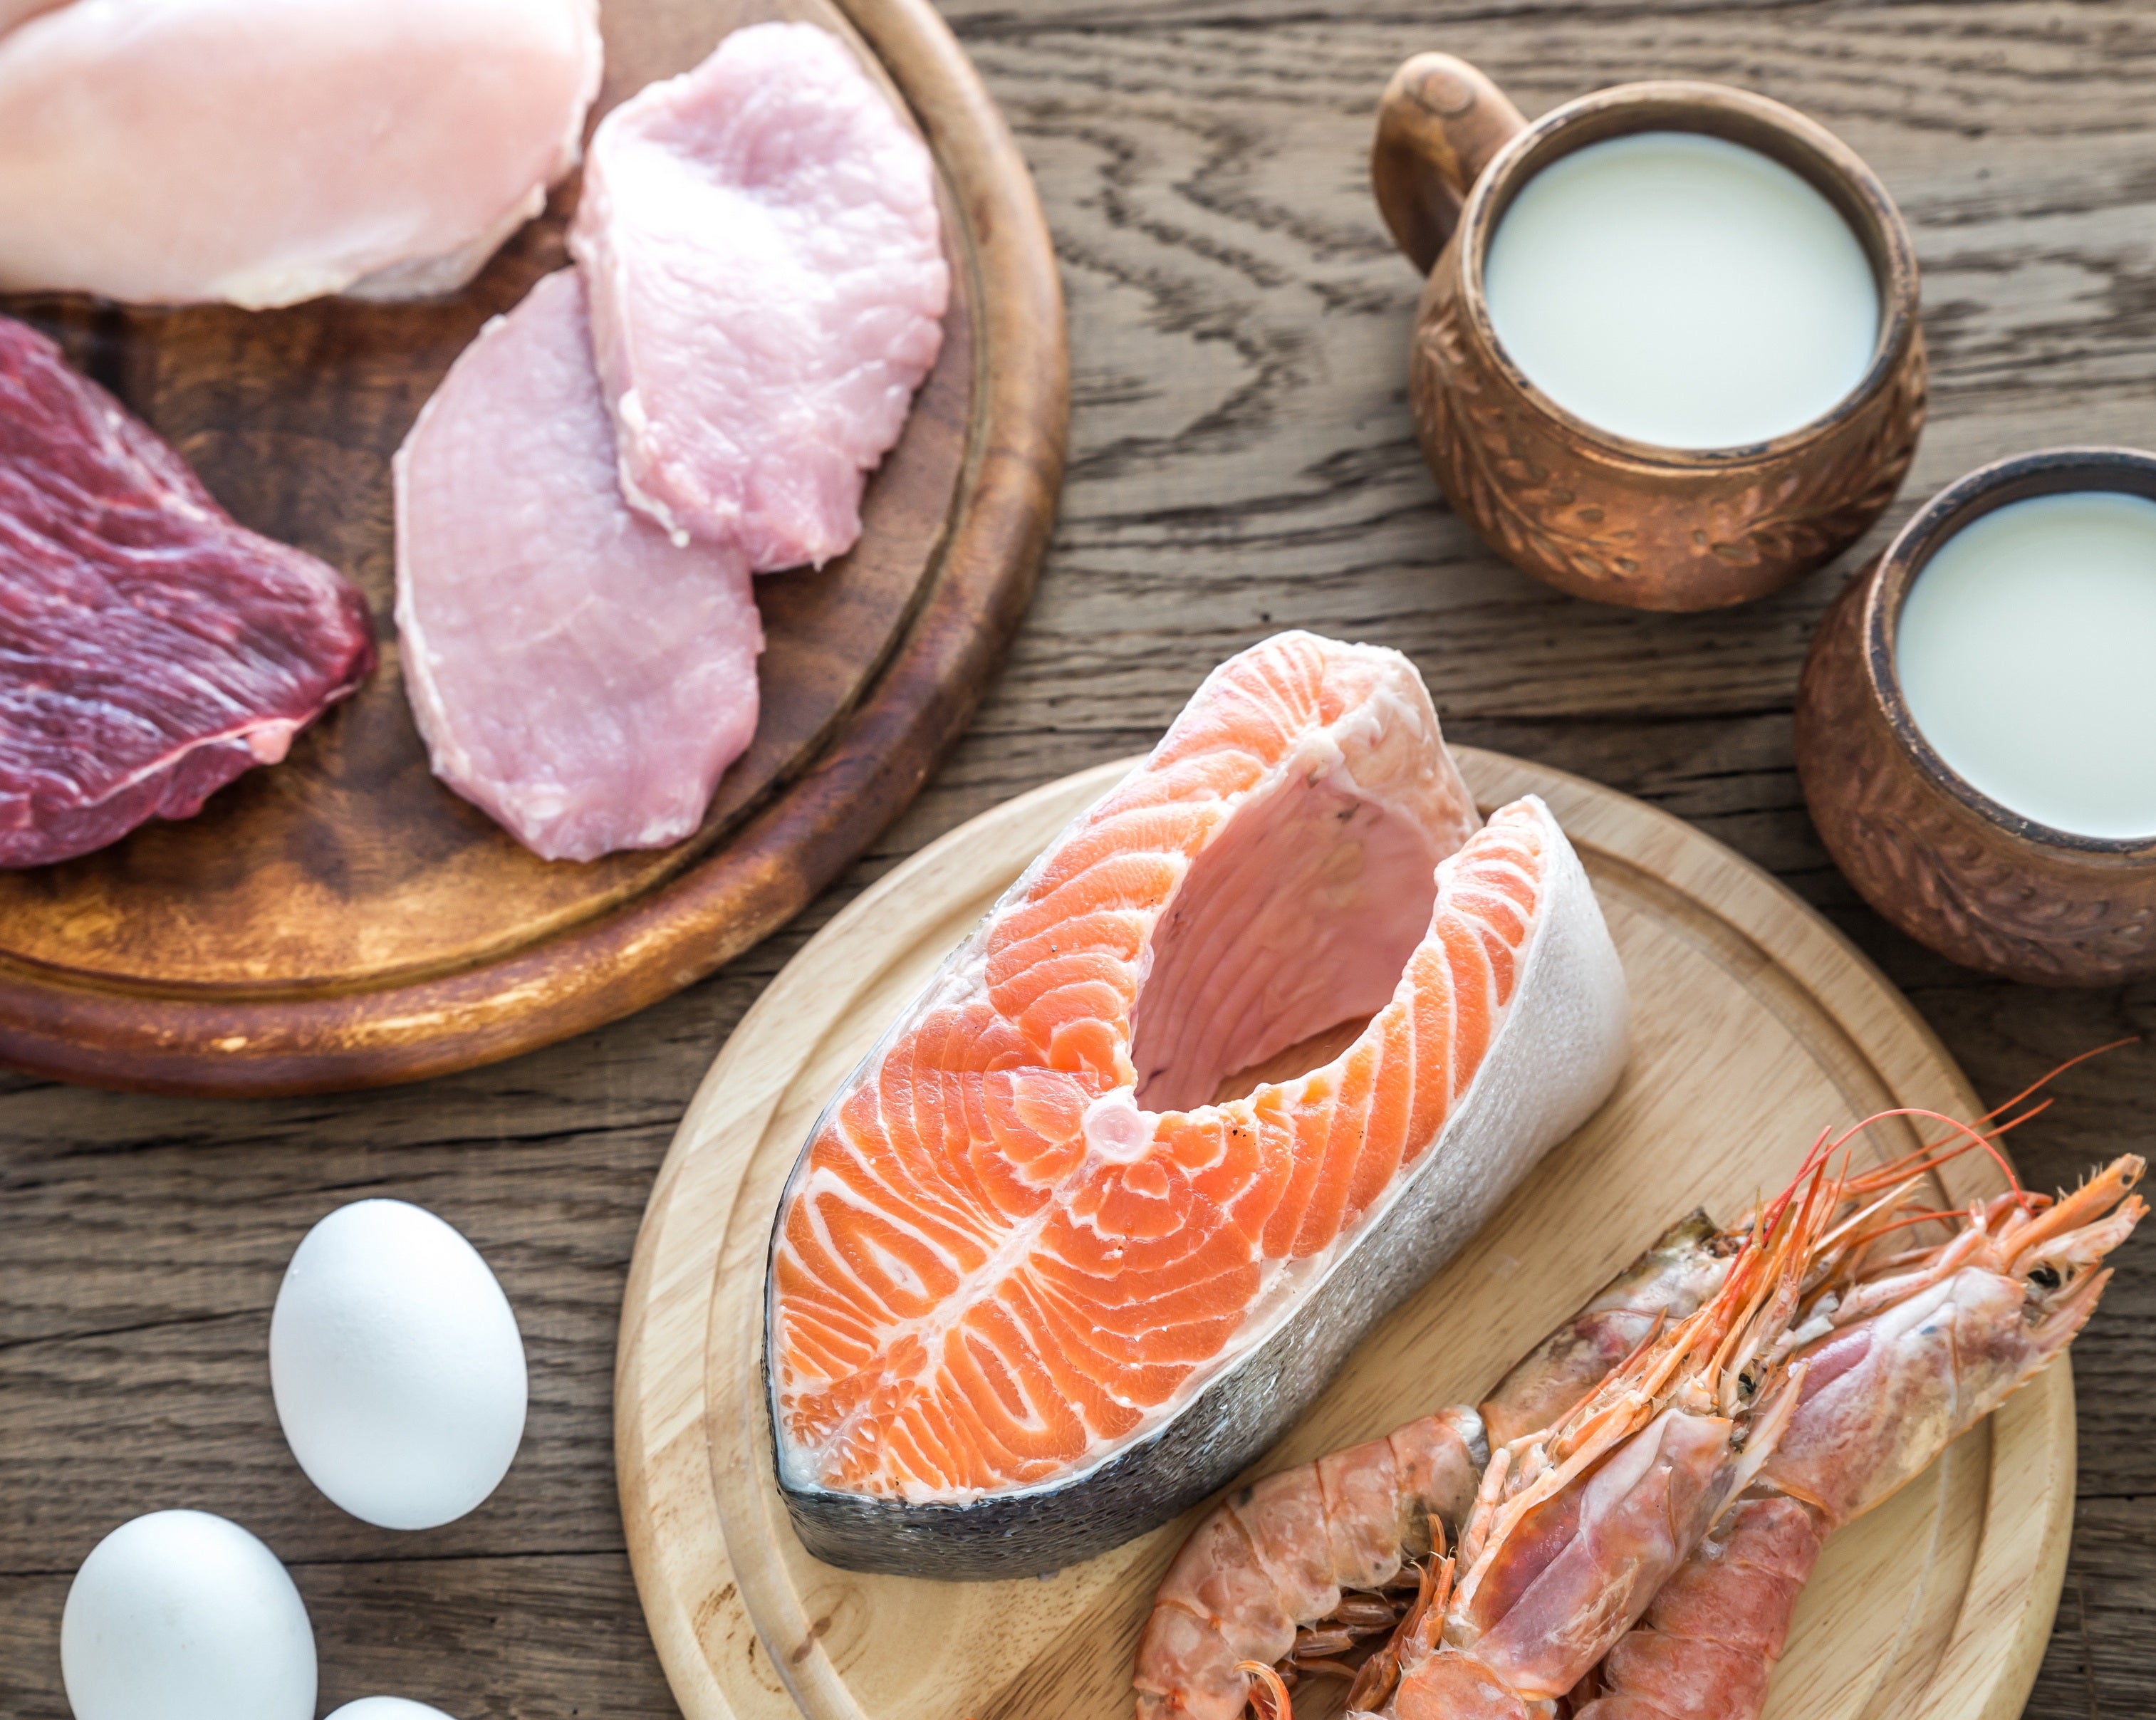 Foods naturally containing vitamin b12, including fish, shellfish, liver, meat, eggs, poultry, and dairy products such as milk, cheese, and yogurt.